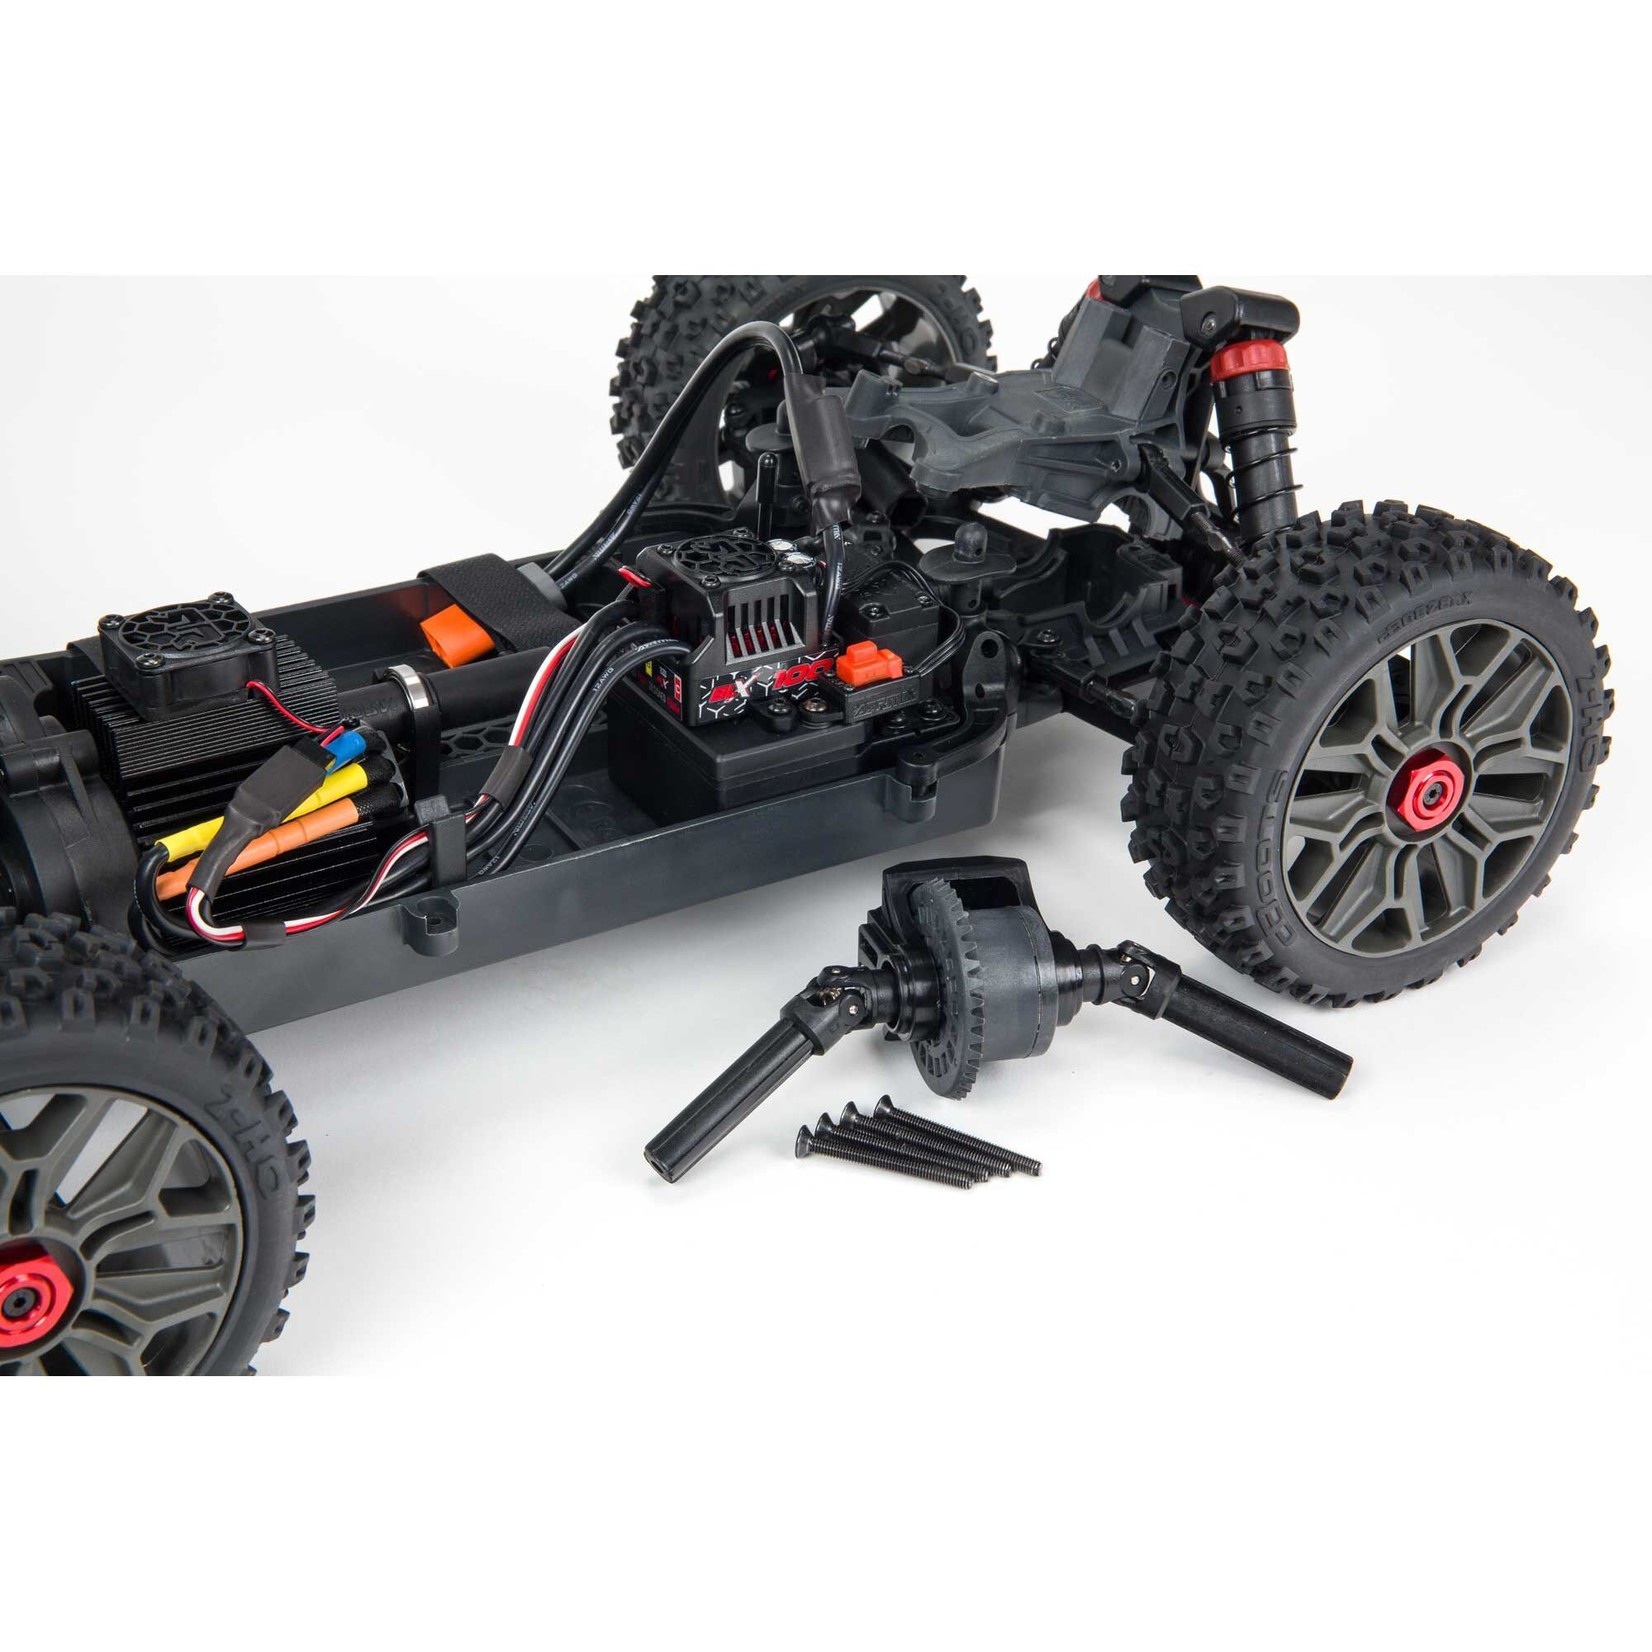 Arrma 1/8 TYPHON 4WD V3 3S BLX Brushless Buggy RTR,  Red